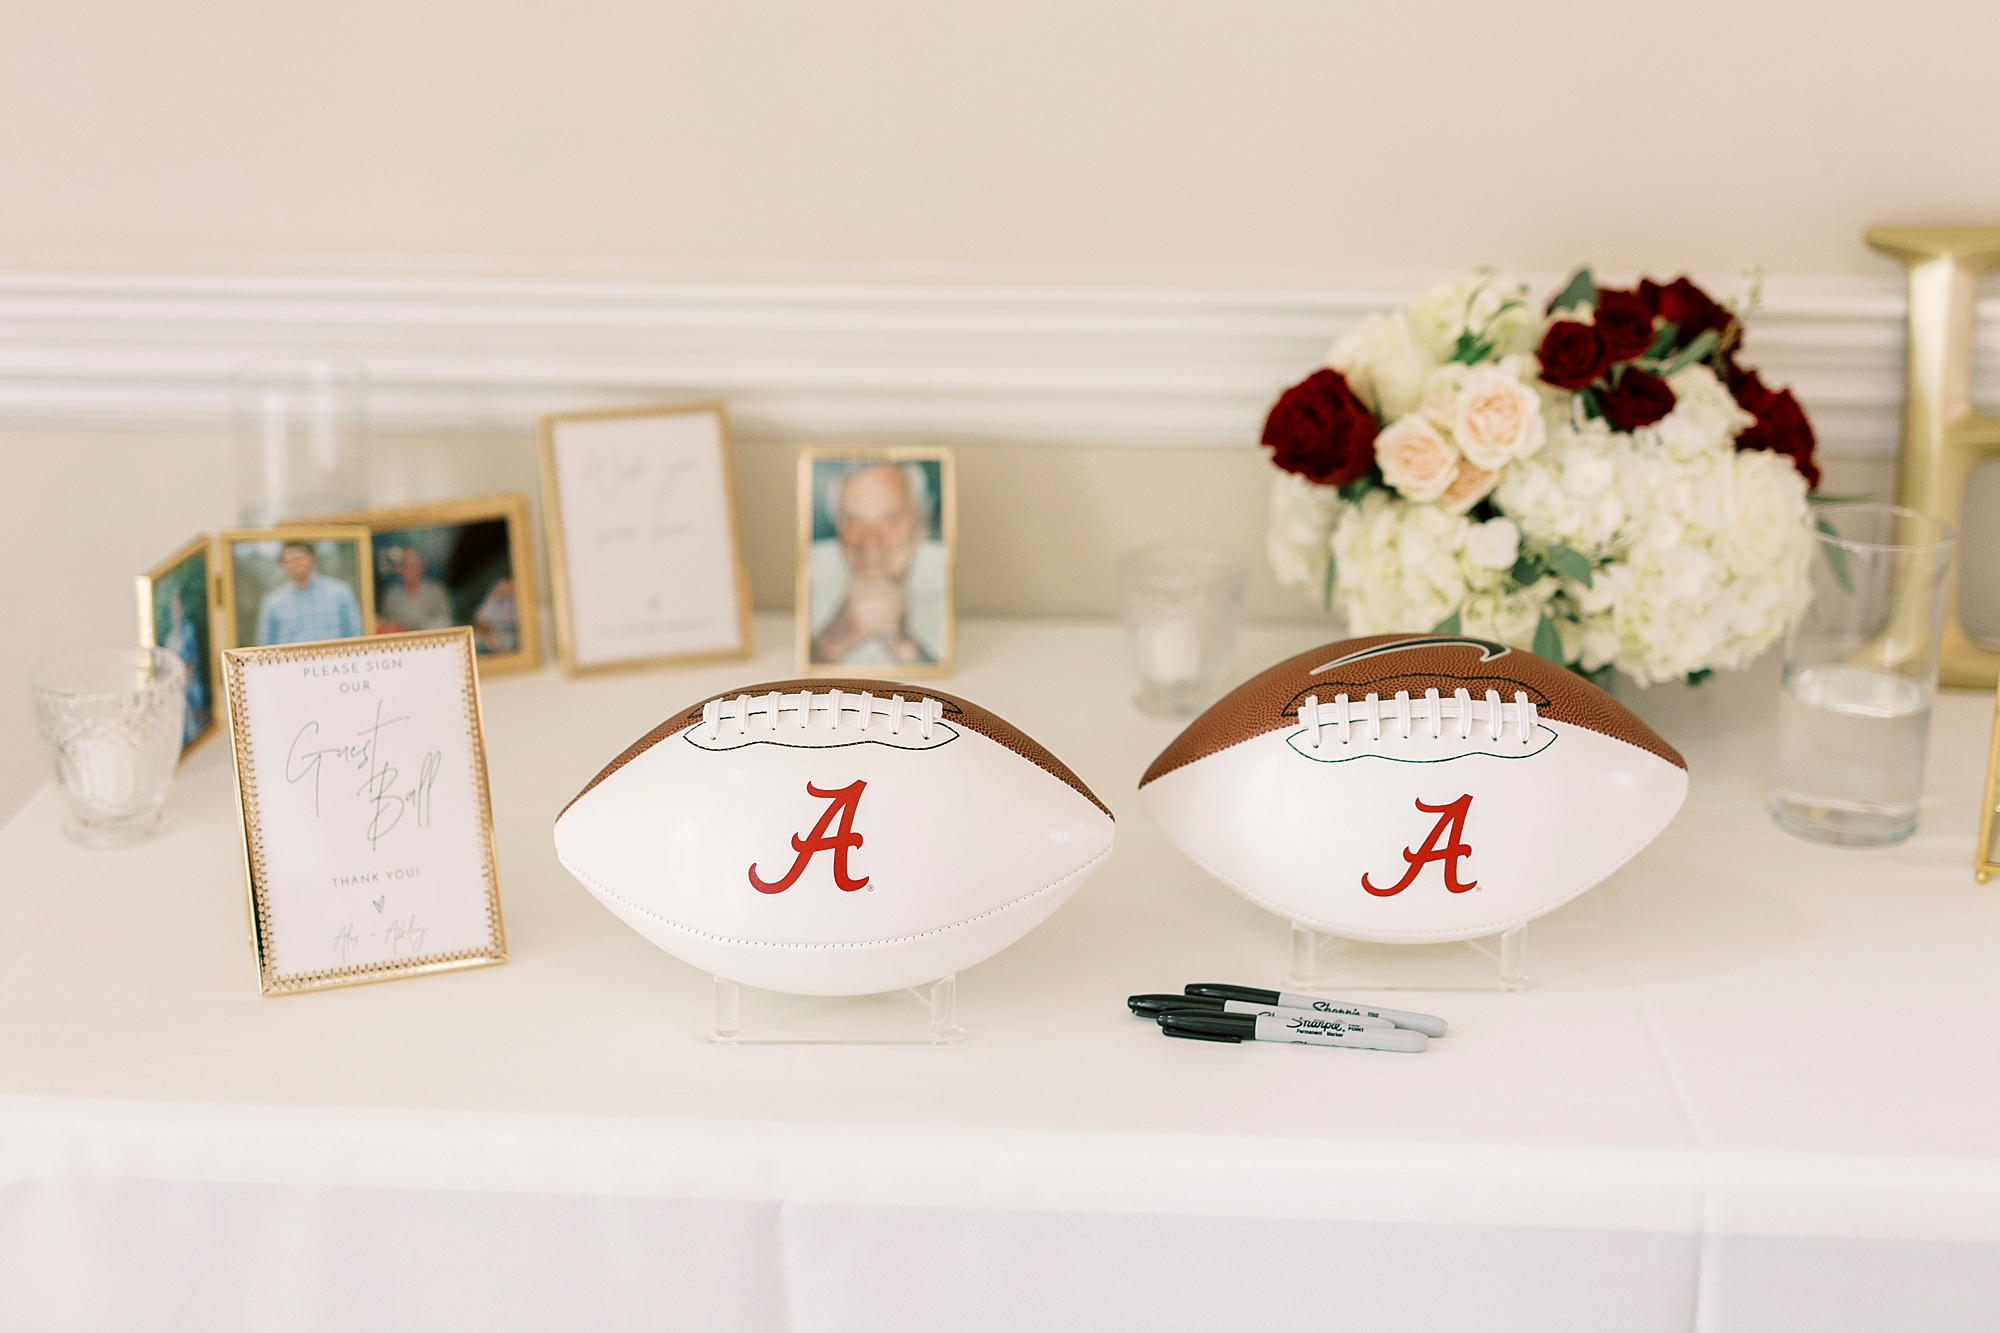 footballs with Alabama logo for guest book